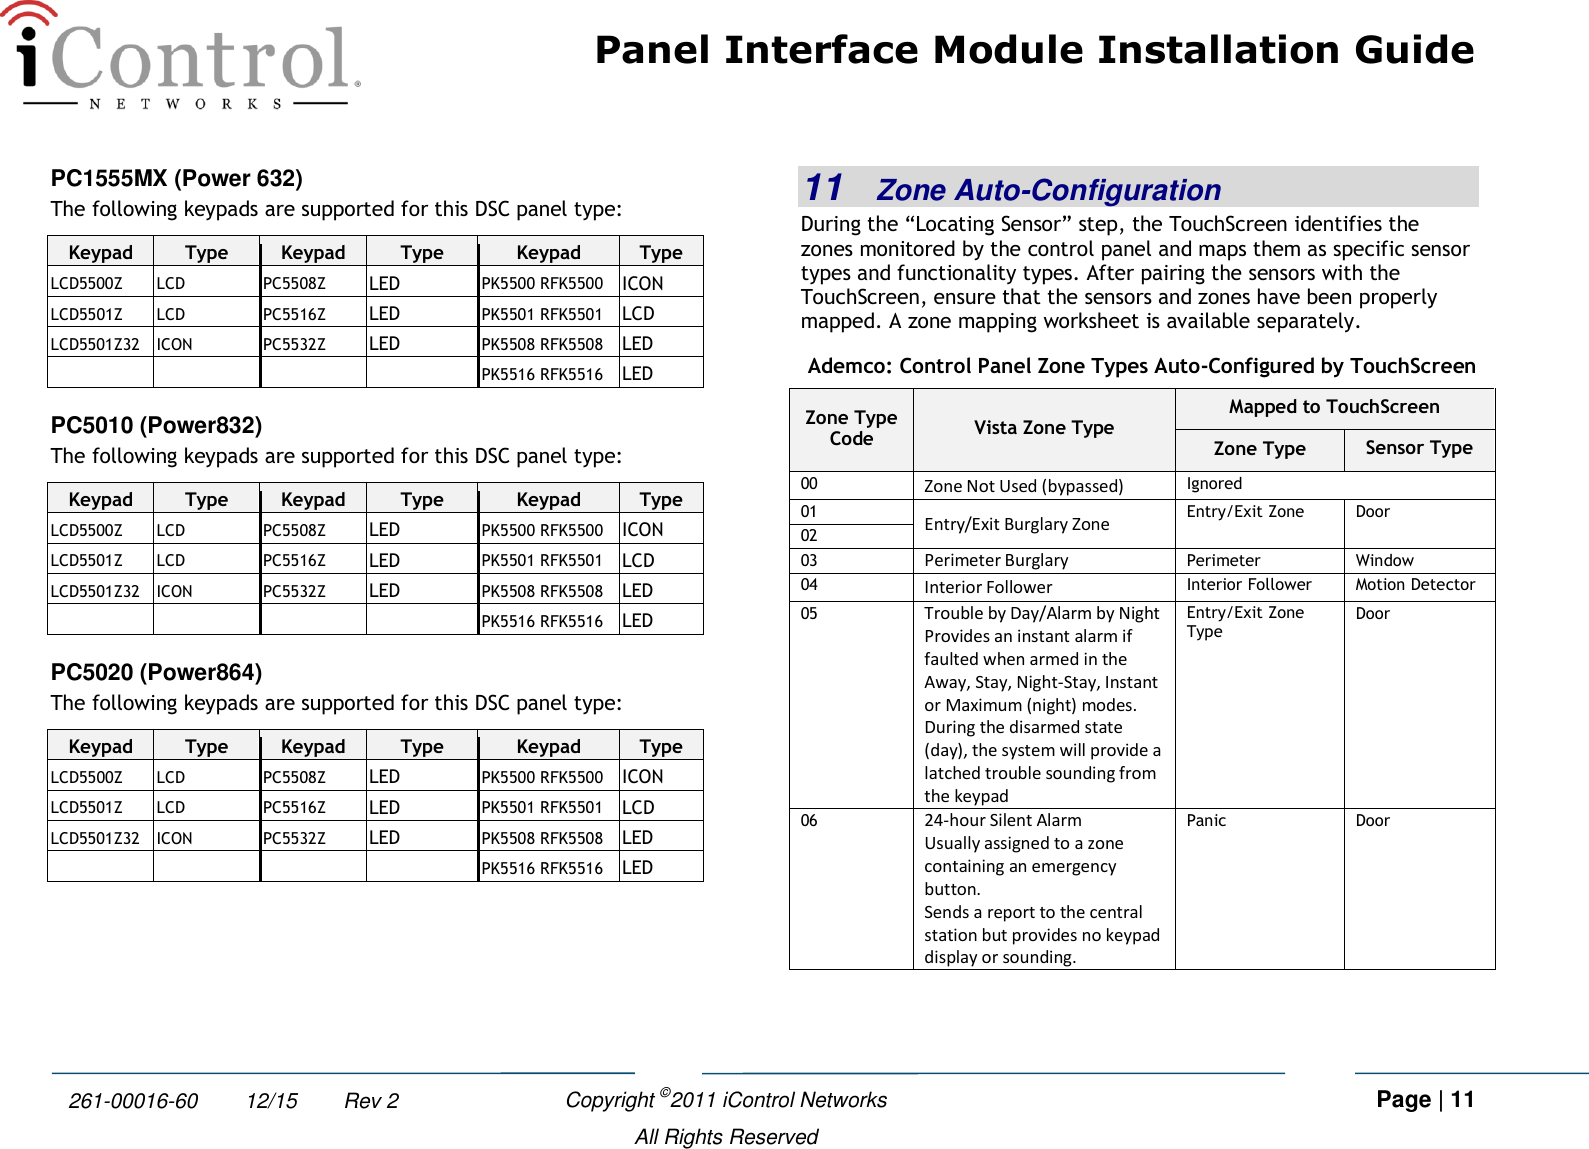 Panel Interface Module Installation Guide    Copyright ©2011 iControl Networks   Page | 11  All Rights Reserved 261-00016-60        12/15        Rev 2 PC1555MX (Power 632) The following keypads are supported for this DSC panel type: Keypad Type Keypad Type Keypad Type LCD5500Z LCD PC5508Z LED PK5500 RFK5500 ICON LCD5501Z LCD PC5516Z LED PK5501 RFK5501 LCD LCD5501Z32 ICON PC5532Z LED PK5508 RFK5508 LED     PK5516 RFK5516 LED PC5010 (Power832) The following keypads are supported for this DSC panel type: Keypad Type Keypad Type Keypad Type LCD5500Z LCD PC5508Z LED PK5500 RFK5500 ICON LCD5501Z LCD PC5516Z LED PK5501 RFK5501 LCD LCD5501Z32 ICON PC5532Z LED PK5508 RFK5508 LED     PK5516 RFK5516 LED PC5020 (Power864) The following keypads are supported for this DSC panel type: Keypad Type Keypad Type Keypad Type LCD5500Z LCD PC5508Z LED PK5500 RFK5500 ICON LCD5501Z LCD PC5516Z LED PK5501 RFK5501 LCD LCD5501Z32 ICON PC5532Z LED PK5508 RFK5508 LED     PK5516 RFK5516 LED  11 Zone Auto-Configuration During the “Locating Sensor” step, the TouchScreen identifies the zones monitored by the control panel and maps them as specific sensor types and functionality types. After pairing the sensors with the TouchScreen, ensure that the sensors and zones have been properly mapped. A zone mapping worksheet is available separately. Ademco: Control Panel Zone Types Auto-Configured by TouchScreen Zone Type Code Vista Zone Type Mapped to TouchScreen Zone Type Sensor Type 00 Zone Not Used (bypassed) Ignored 01 Entry/Exit Burglary Zone Entry/Exit Zone Door 02 03 Perimeter Burglary Perimeter Window 04 Interior Follower Interior Follower Motion Detector 05 Trouble by Day/Alarm by Night Provides an instant alarm if faulted when armed in the Away, Stay, Night-Stay, Instant or Maximum (night) modes. During the disarmed state (day), the system will provide a latched trouble sounding from the keypad  Entry/Exit Zone Type Door 06 24-hour Silent Alarm Usually assigned to a zone containing an emergency button. Sends a report to the central station but provides no keypad display or sounding. Panic Door 